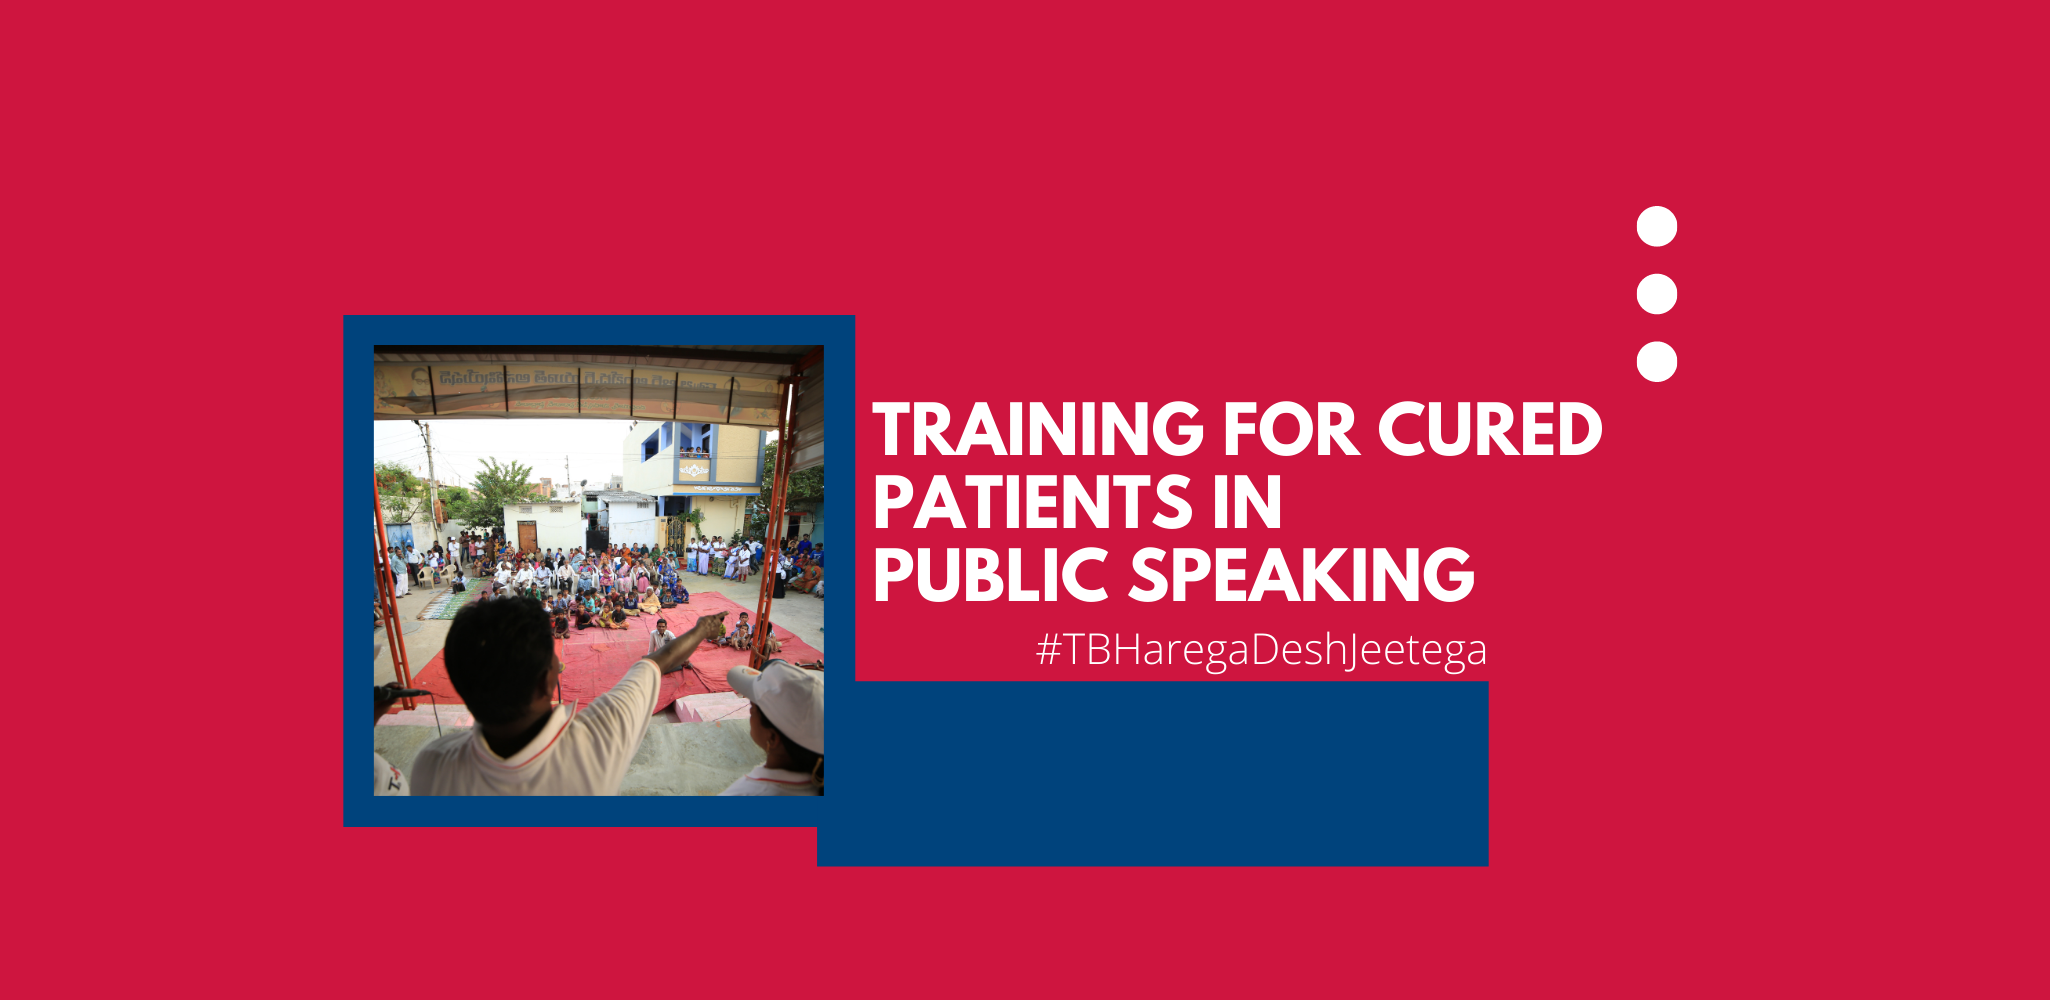 Training for cured patients in public speaking